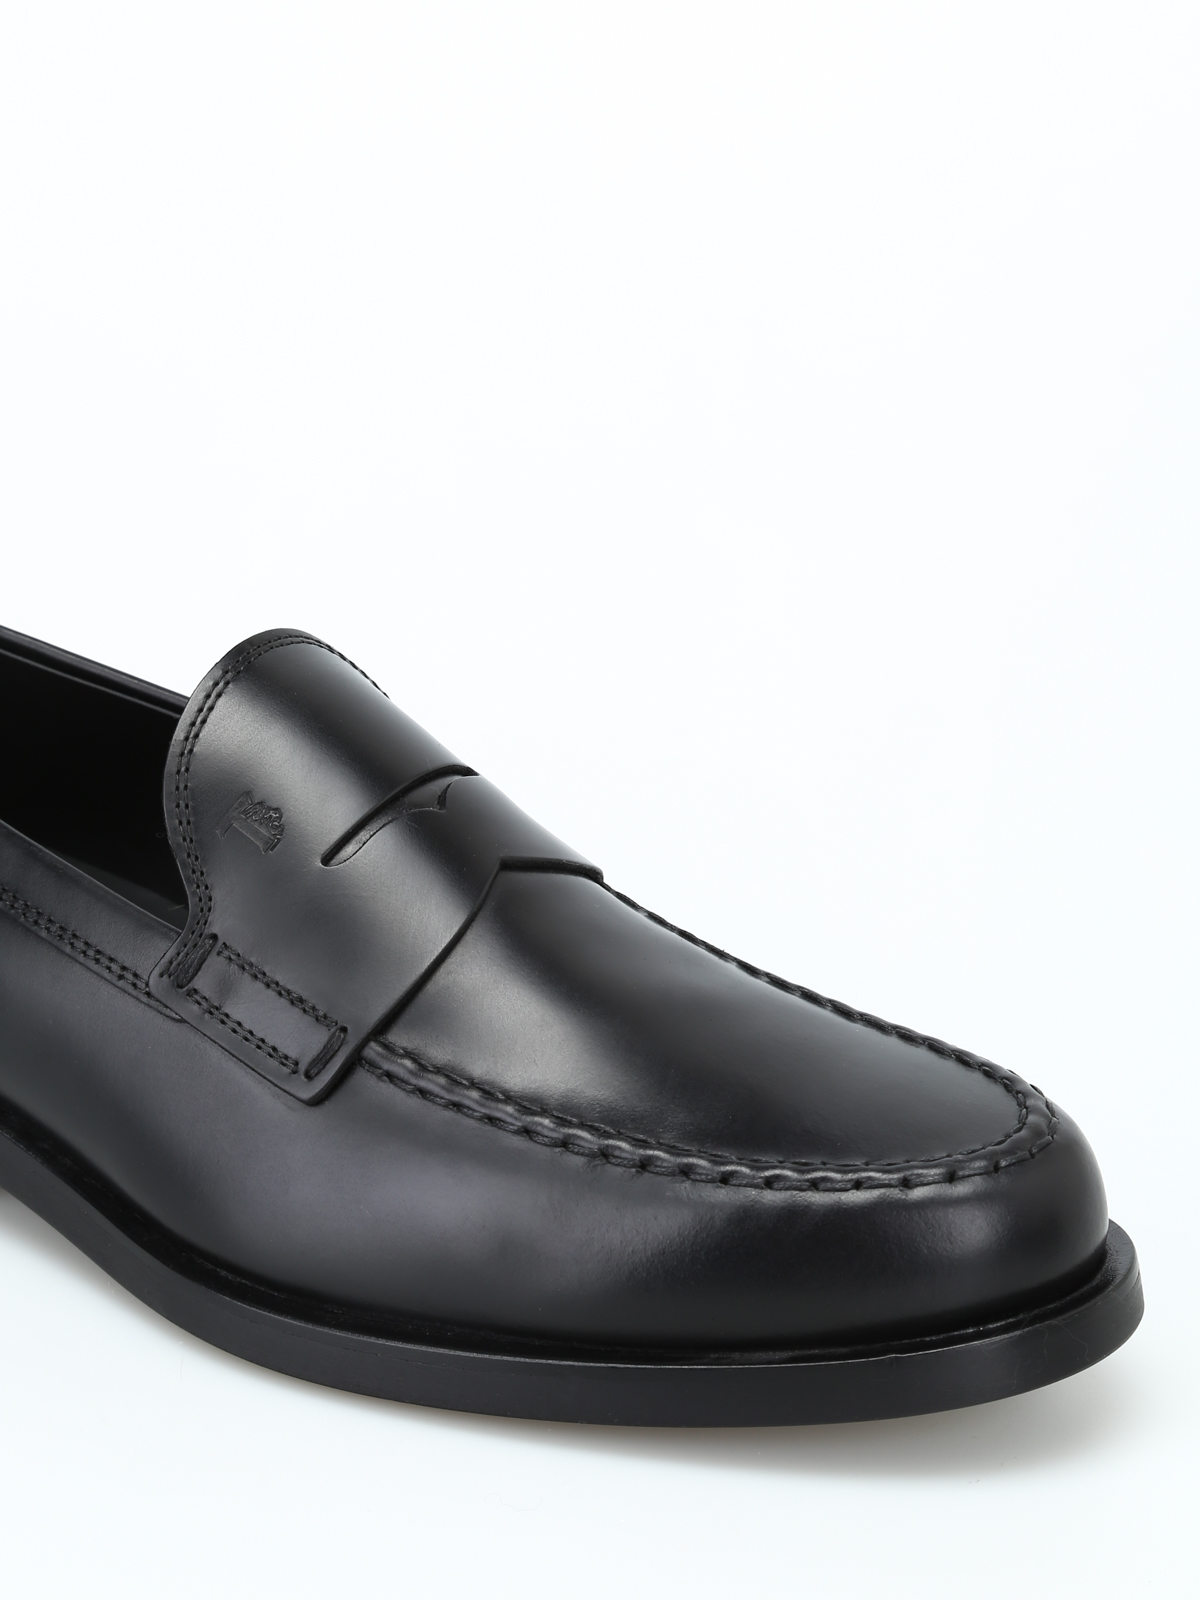 Brobrygge kryds liv Loafers & Slippers Tod's - Black leather formal loafers - XXM0ZF0Q920PLSB999